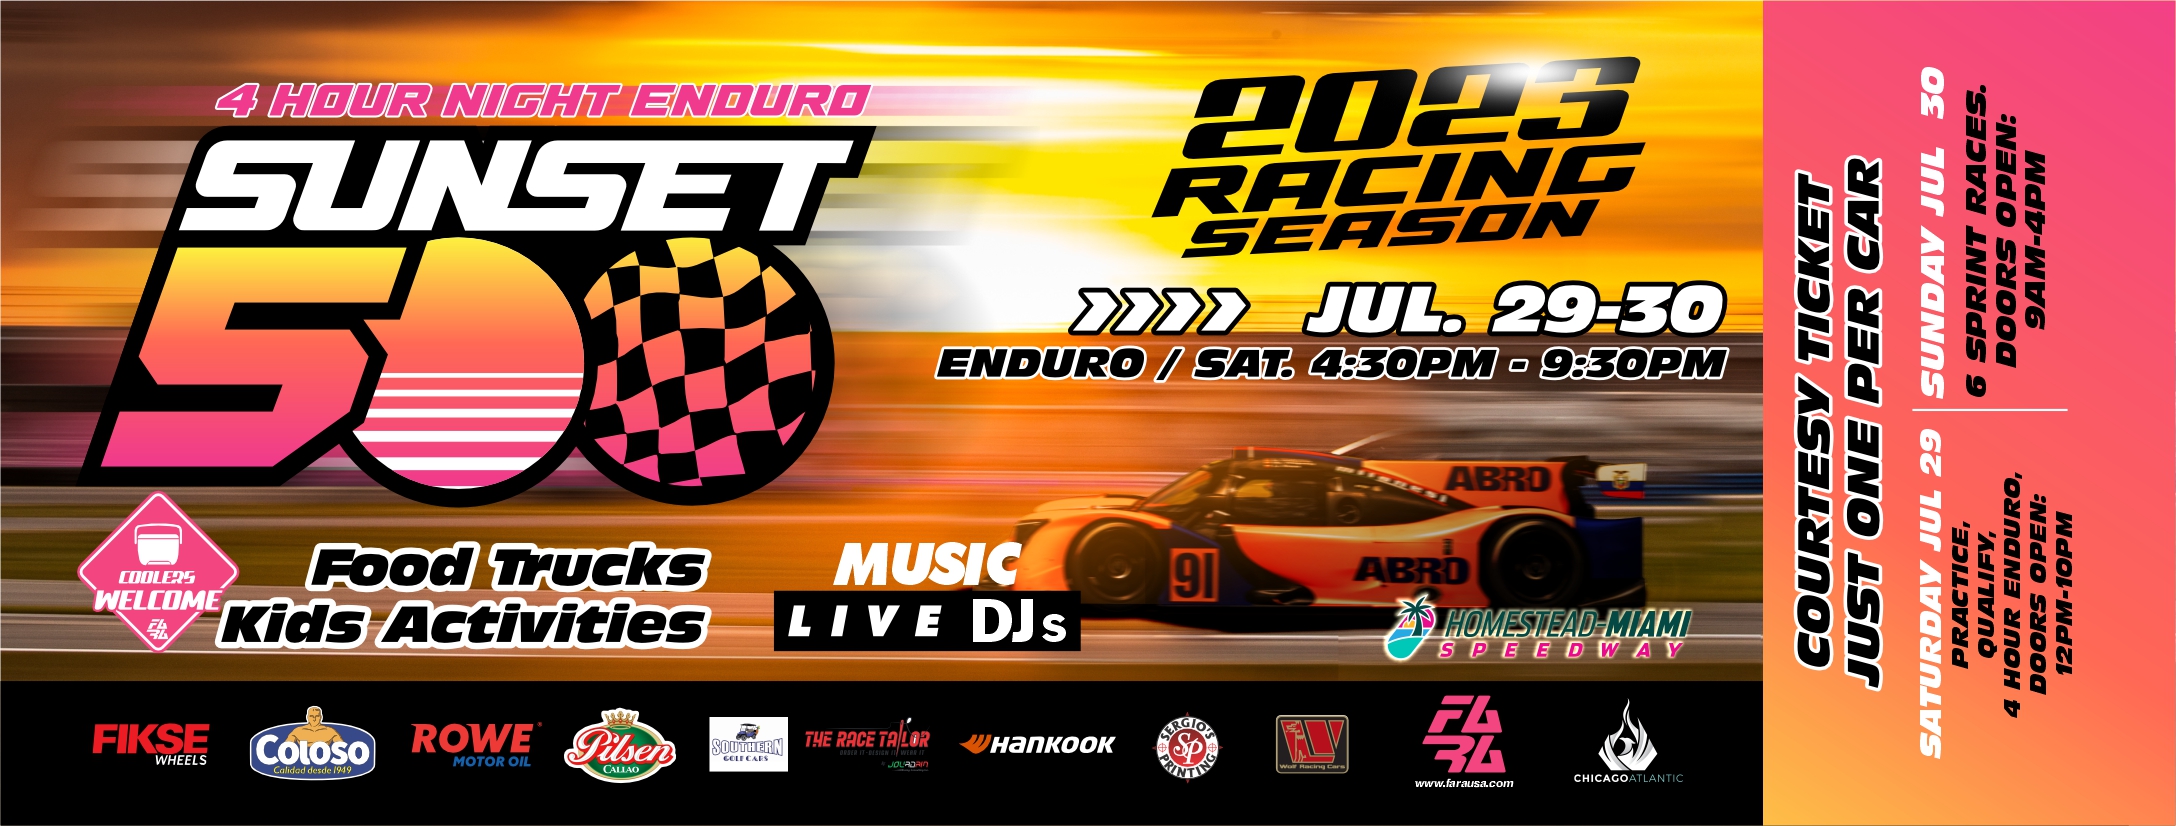 Sunset 500 race weekend ticket front